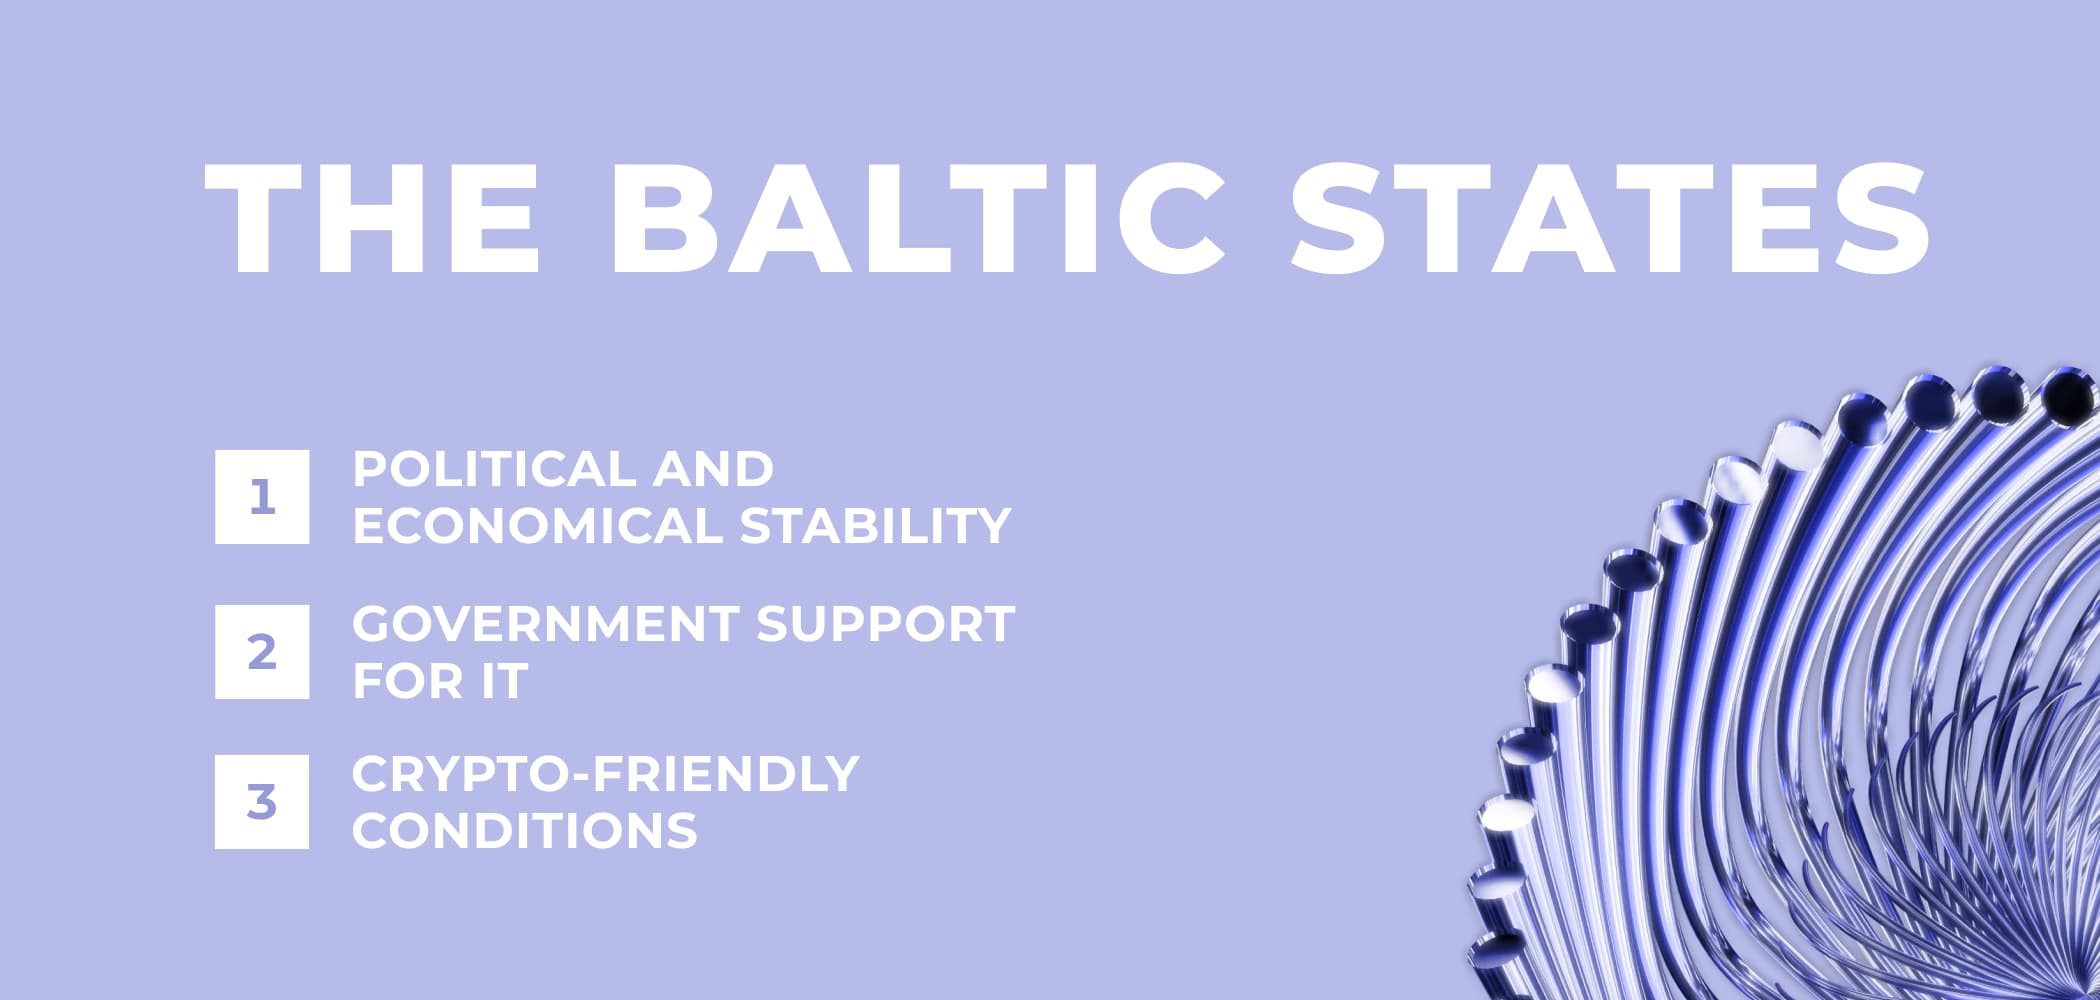 The Baltic States: stable economy as a must